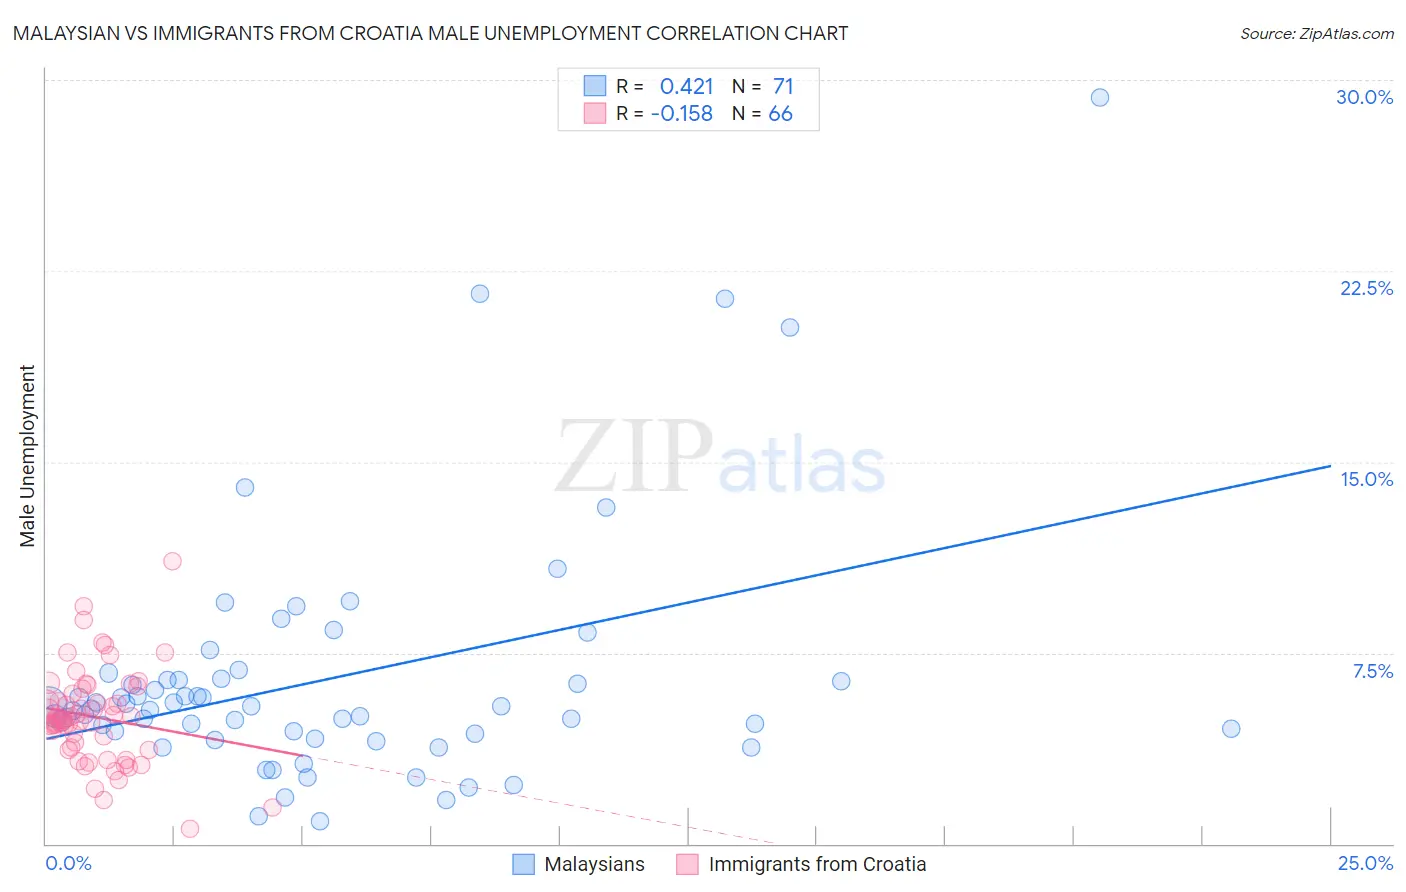 Malaysian vs Immigrants from Croatia Male Unemployment